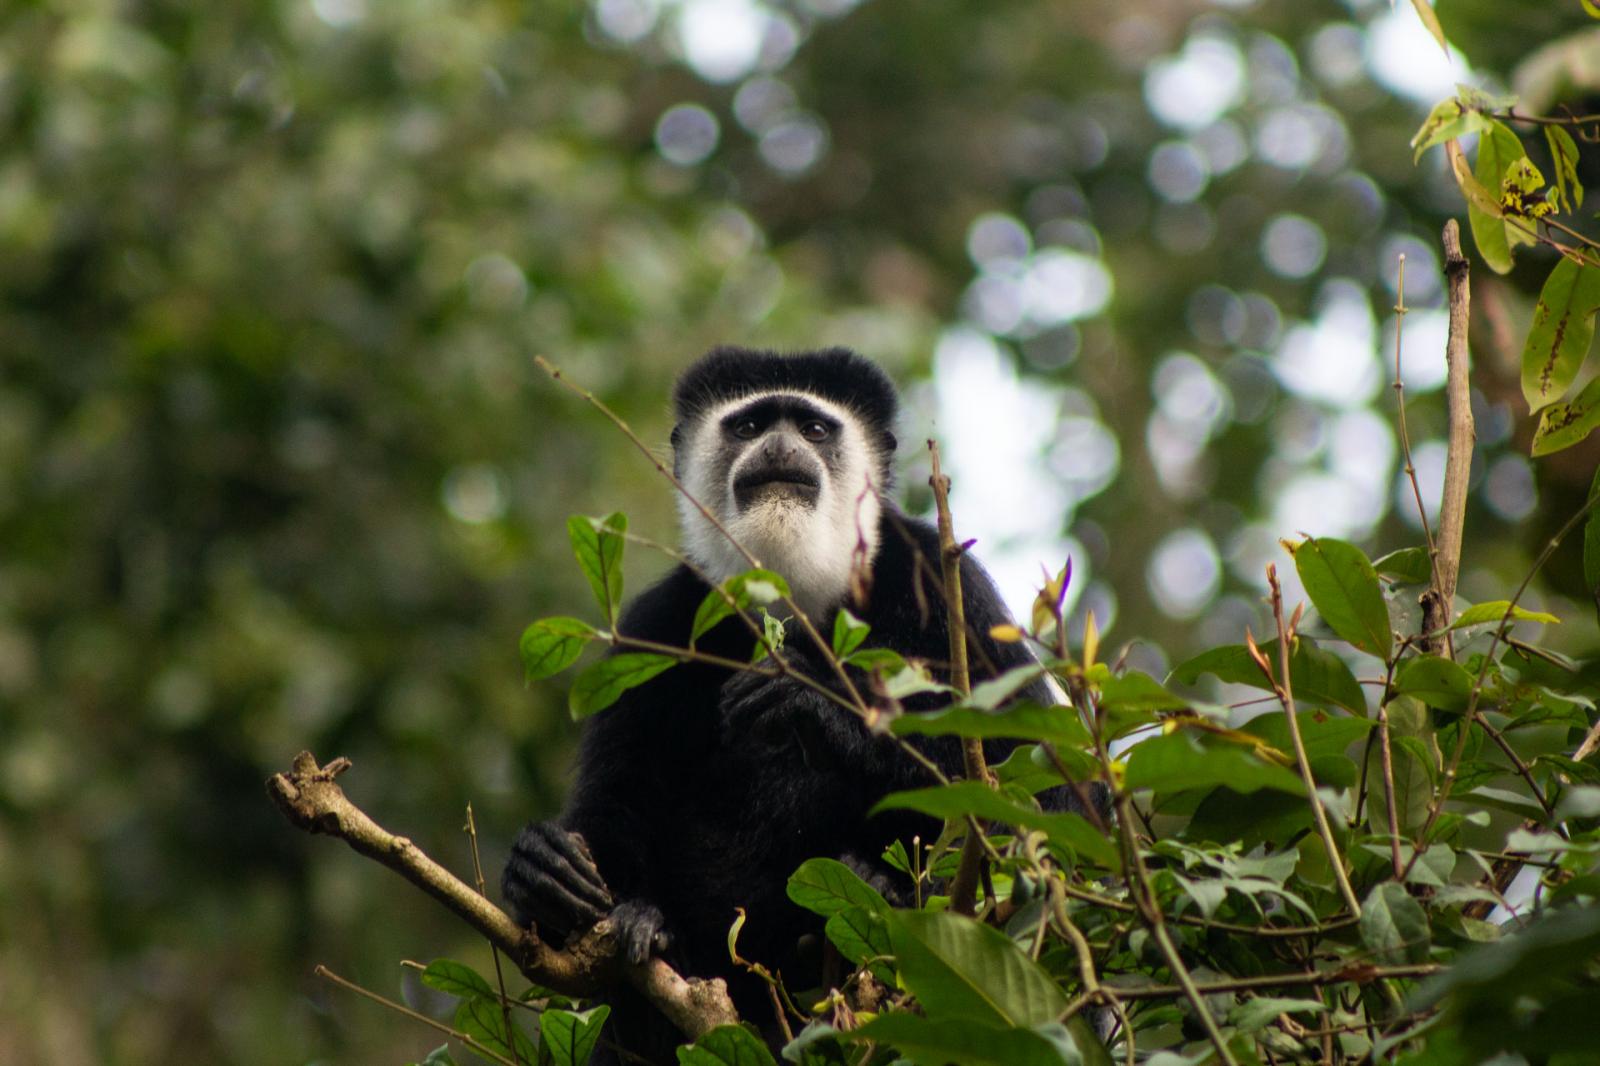 Image from Vanessa Mulondo | A Passion for Nature - A Colobus monkey rests in a tree in Kibale National Park.